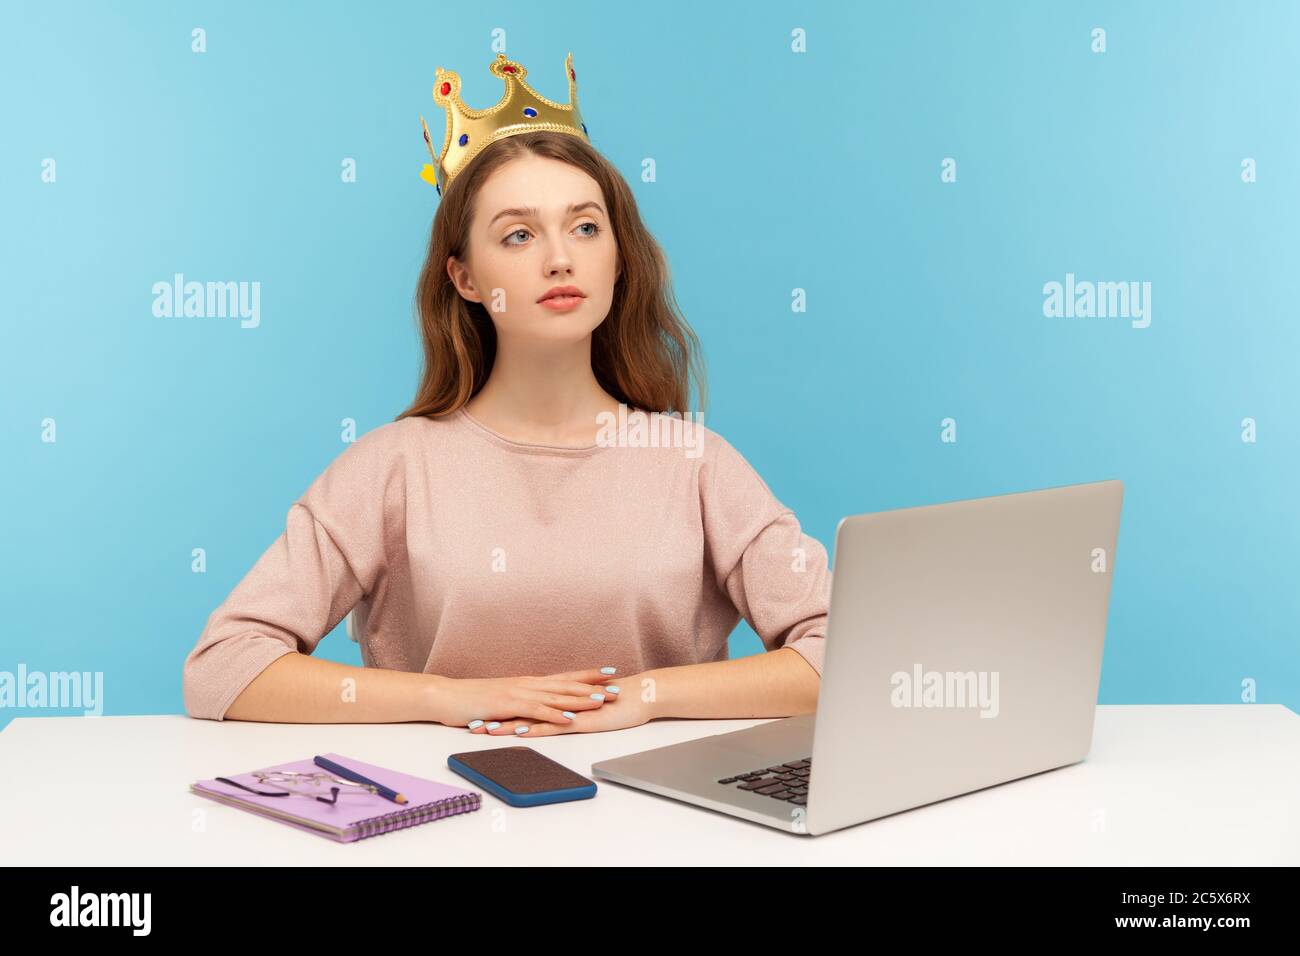 I am big boss. Proud self-confident authoritative businesswoman wearing crown on head, sitting in her office workplace and looking with arrogance. ind Stock Photo